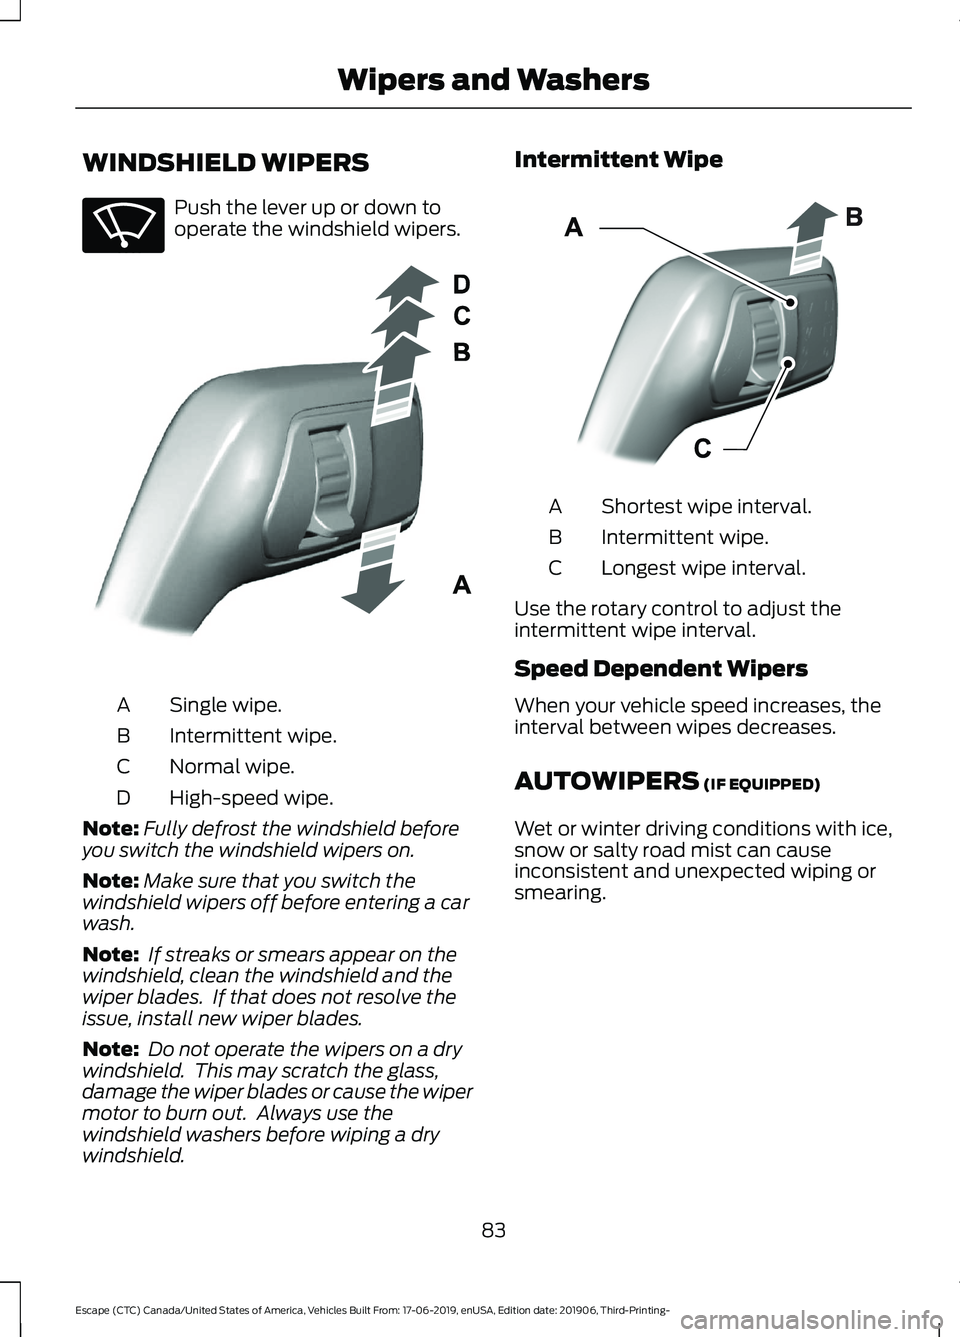 FORD ESCAPE 2020  Owners Manual WINDSHIELD WIPERS
Push the lever up or down to
operate the windshield wipers.
Single wipe.
A
Intermittent wipe.
B
Normal wipe.
C
High-speed wipe.
D
Note: Fully defrost the windshield before
you switch